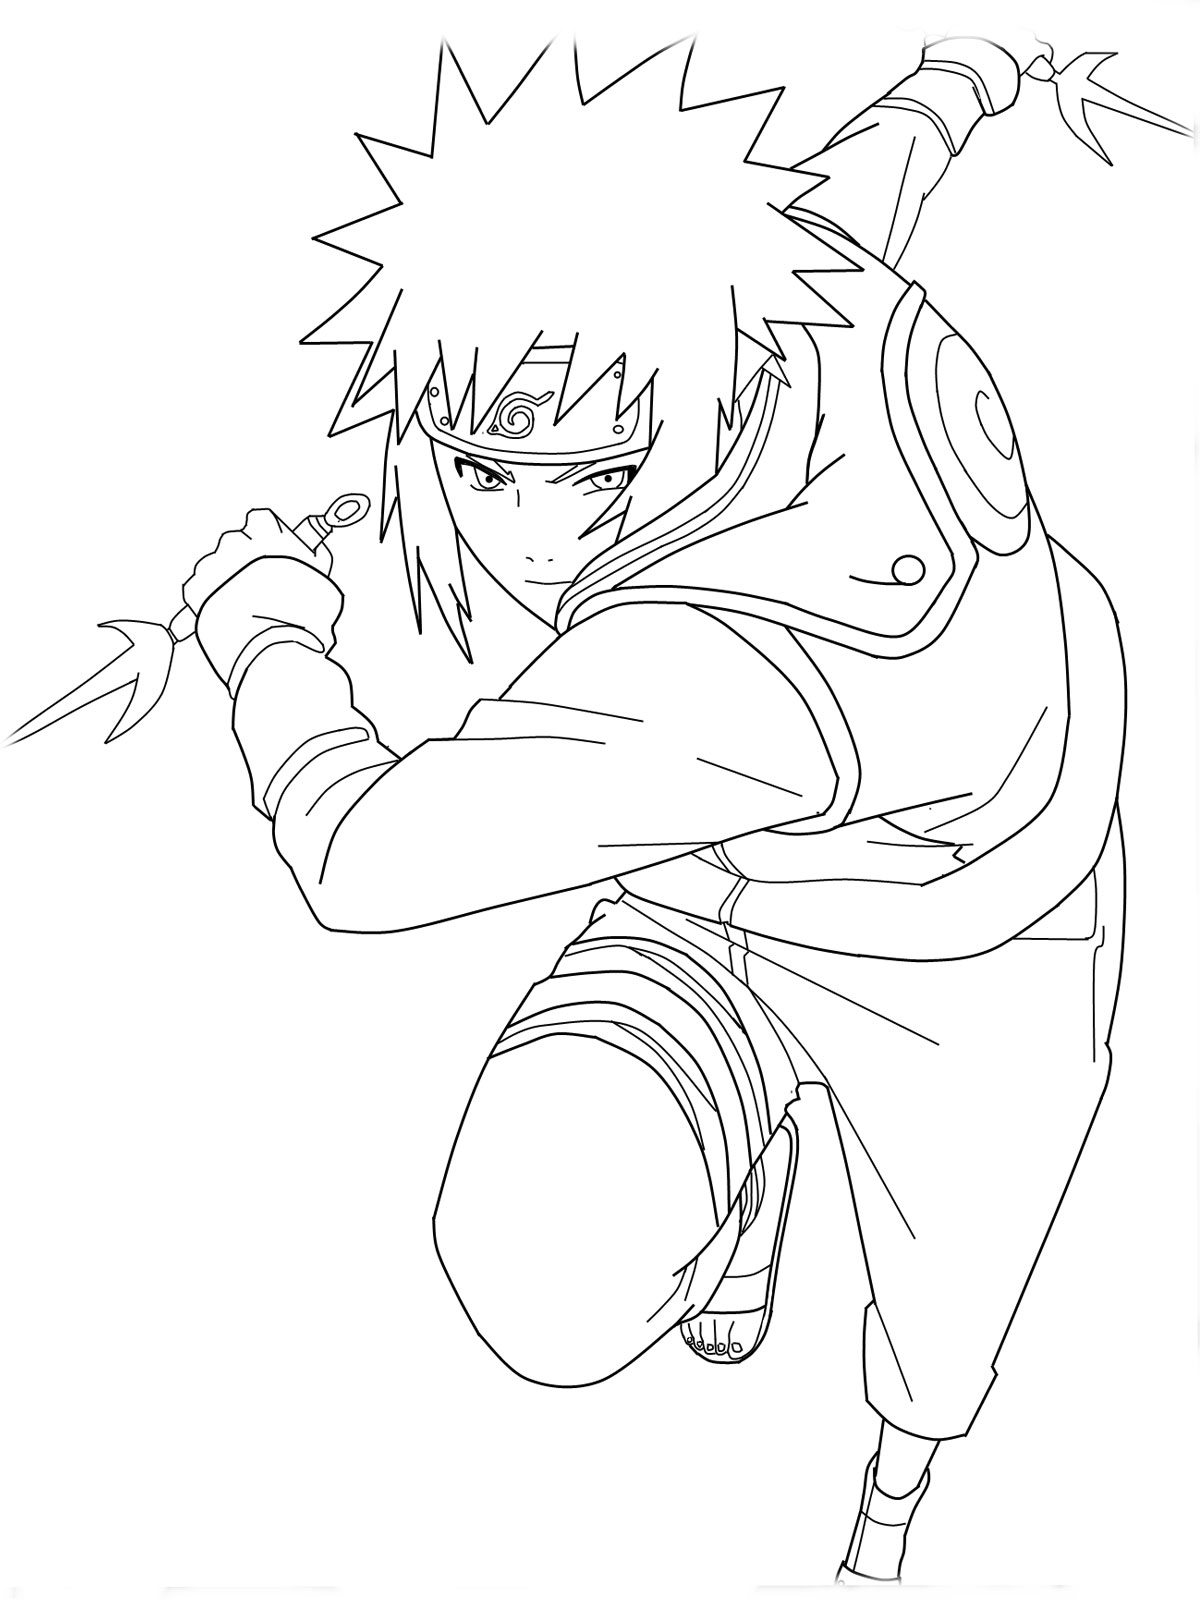 Naruto coloring page from Best Coloring Pages for Kids